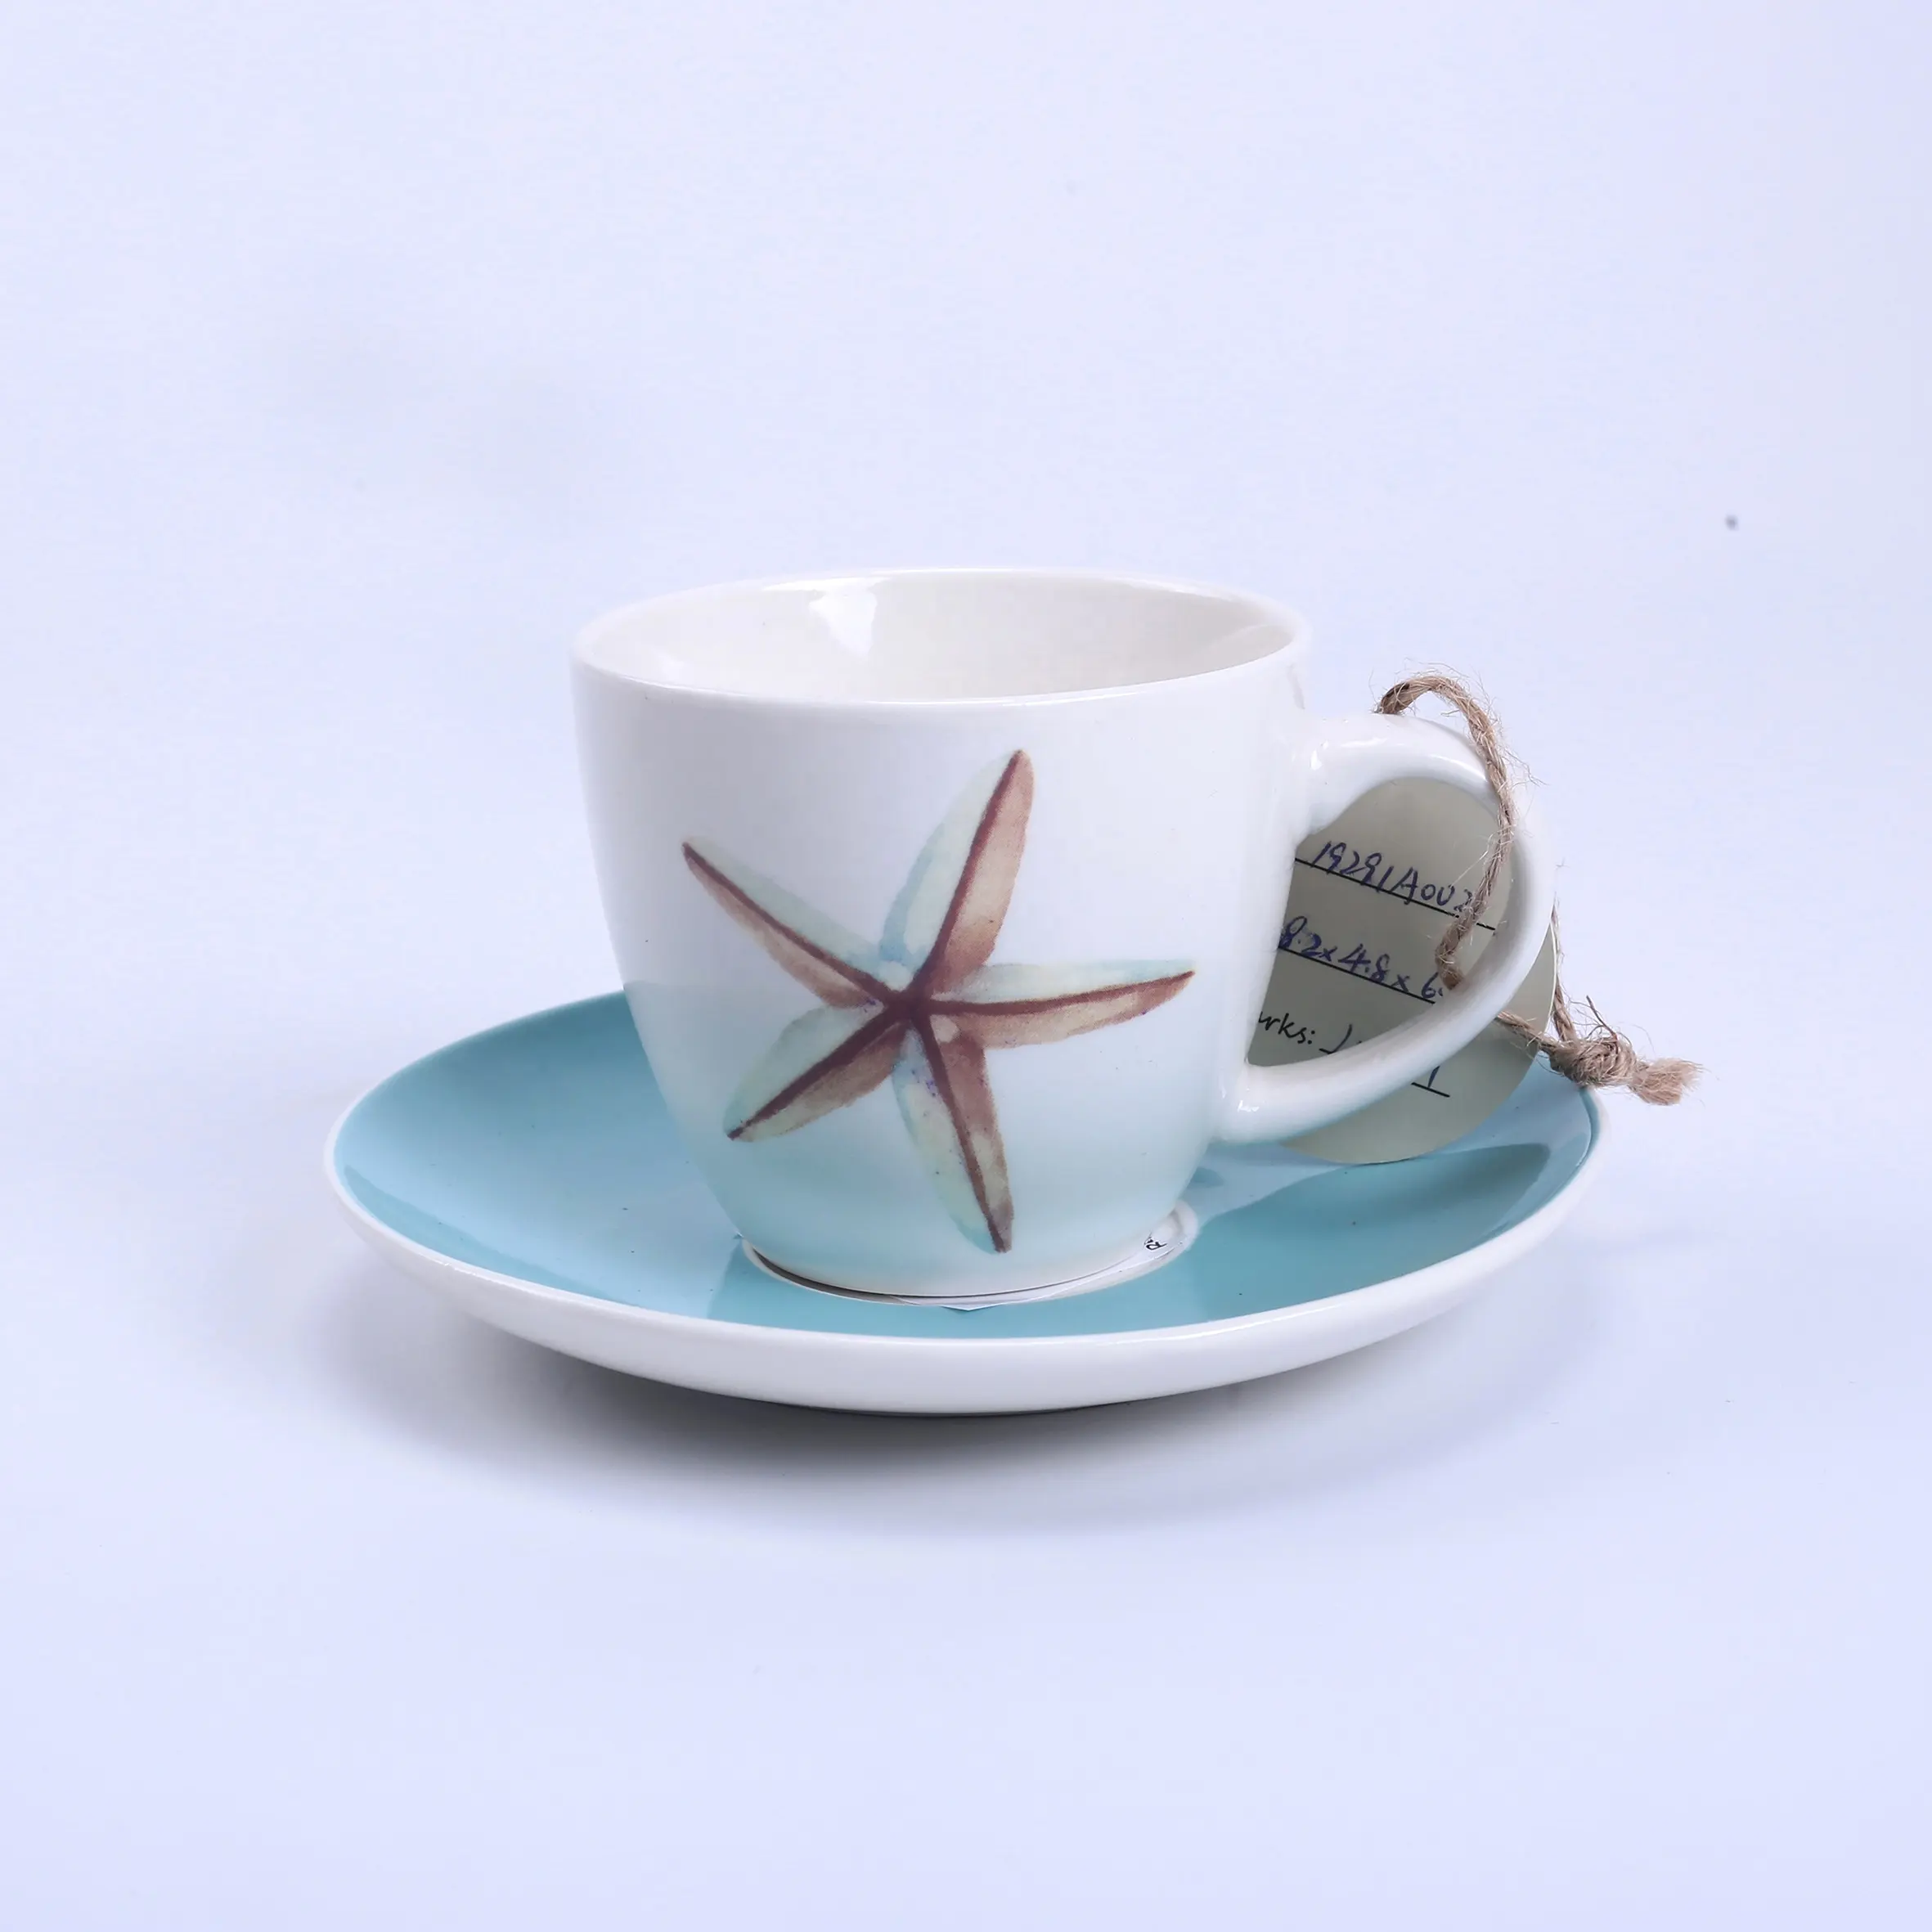 world best selling products personalized handmade porcelain white ceramic mug cup saucer bone china tea cup and saucer